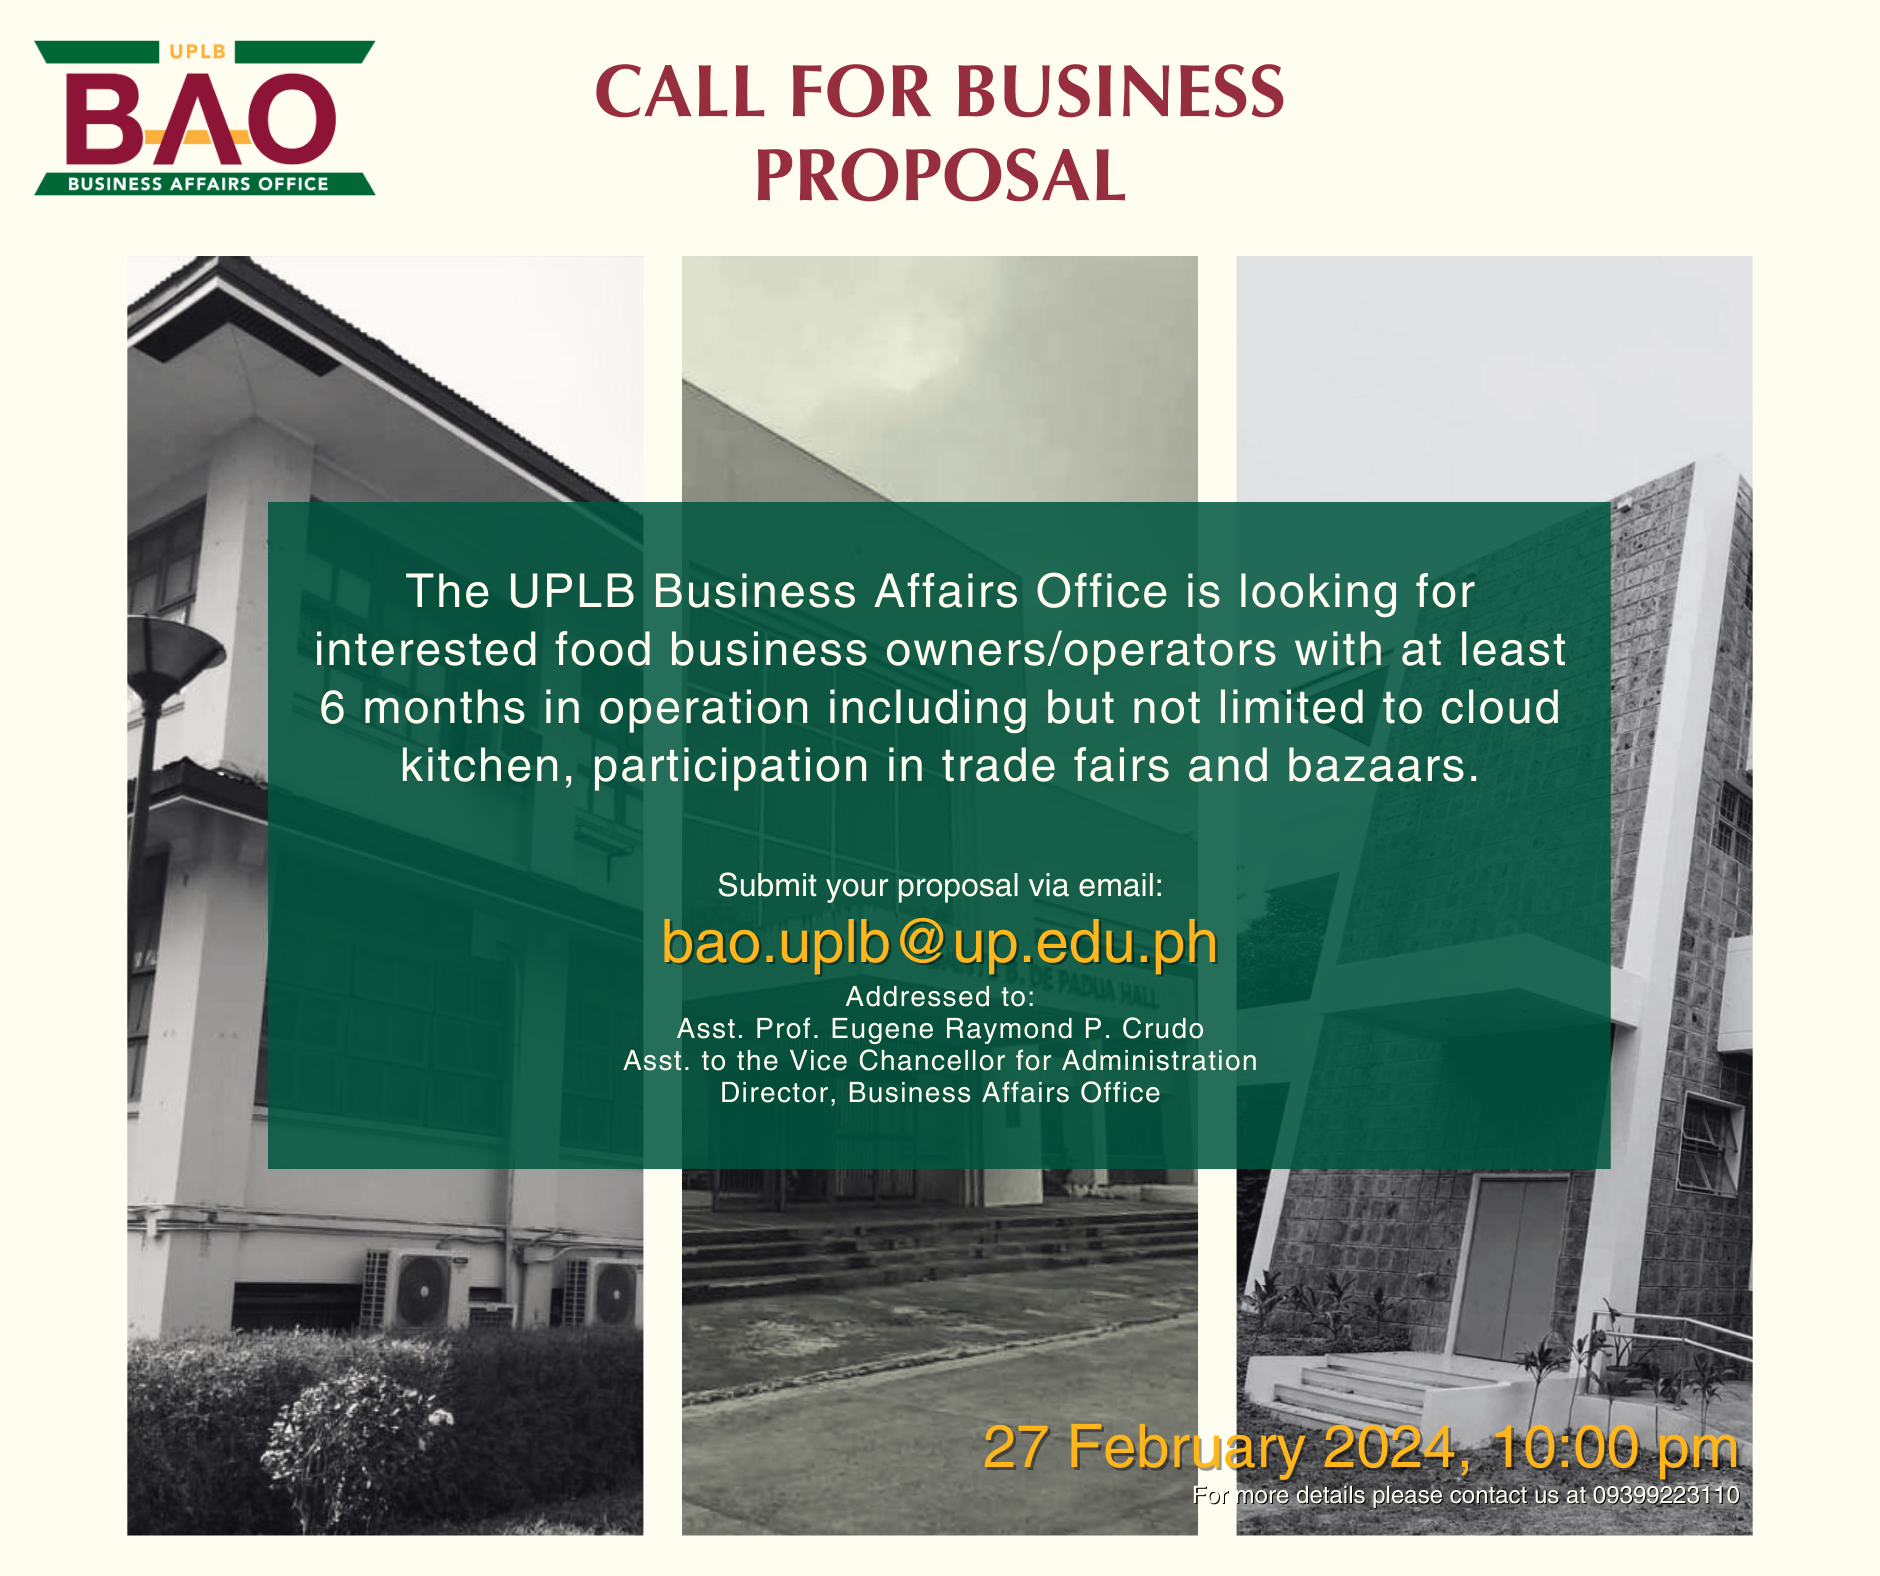 CALL FOR BUSINESS PROPOSAL